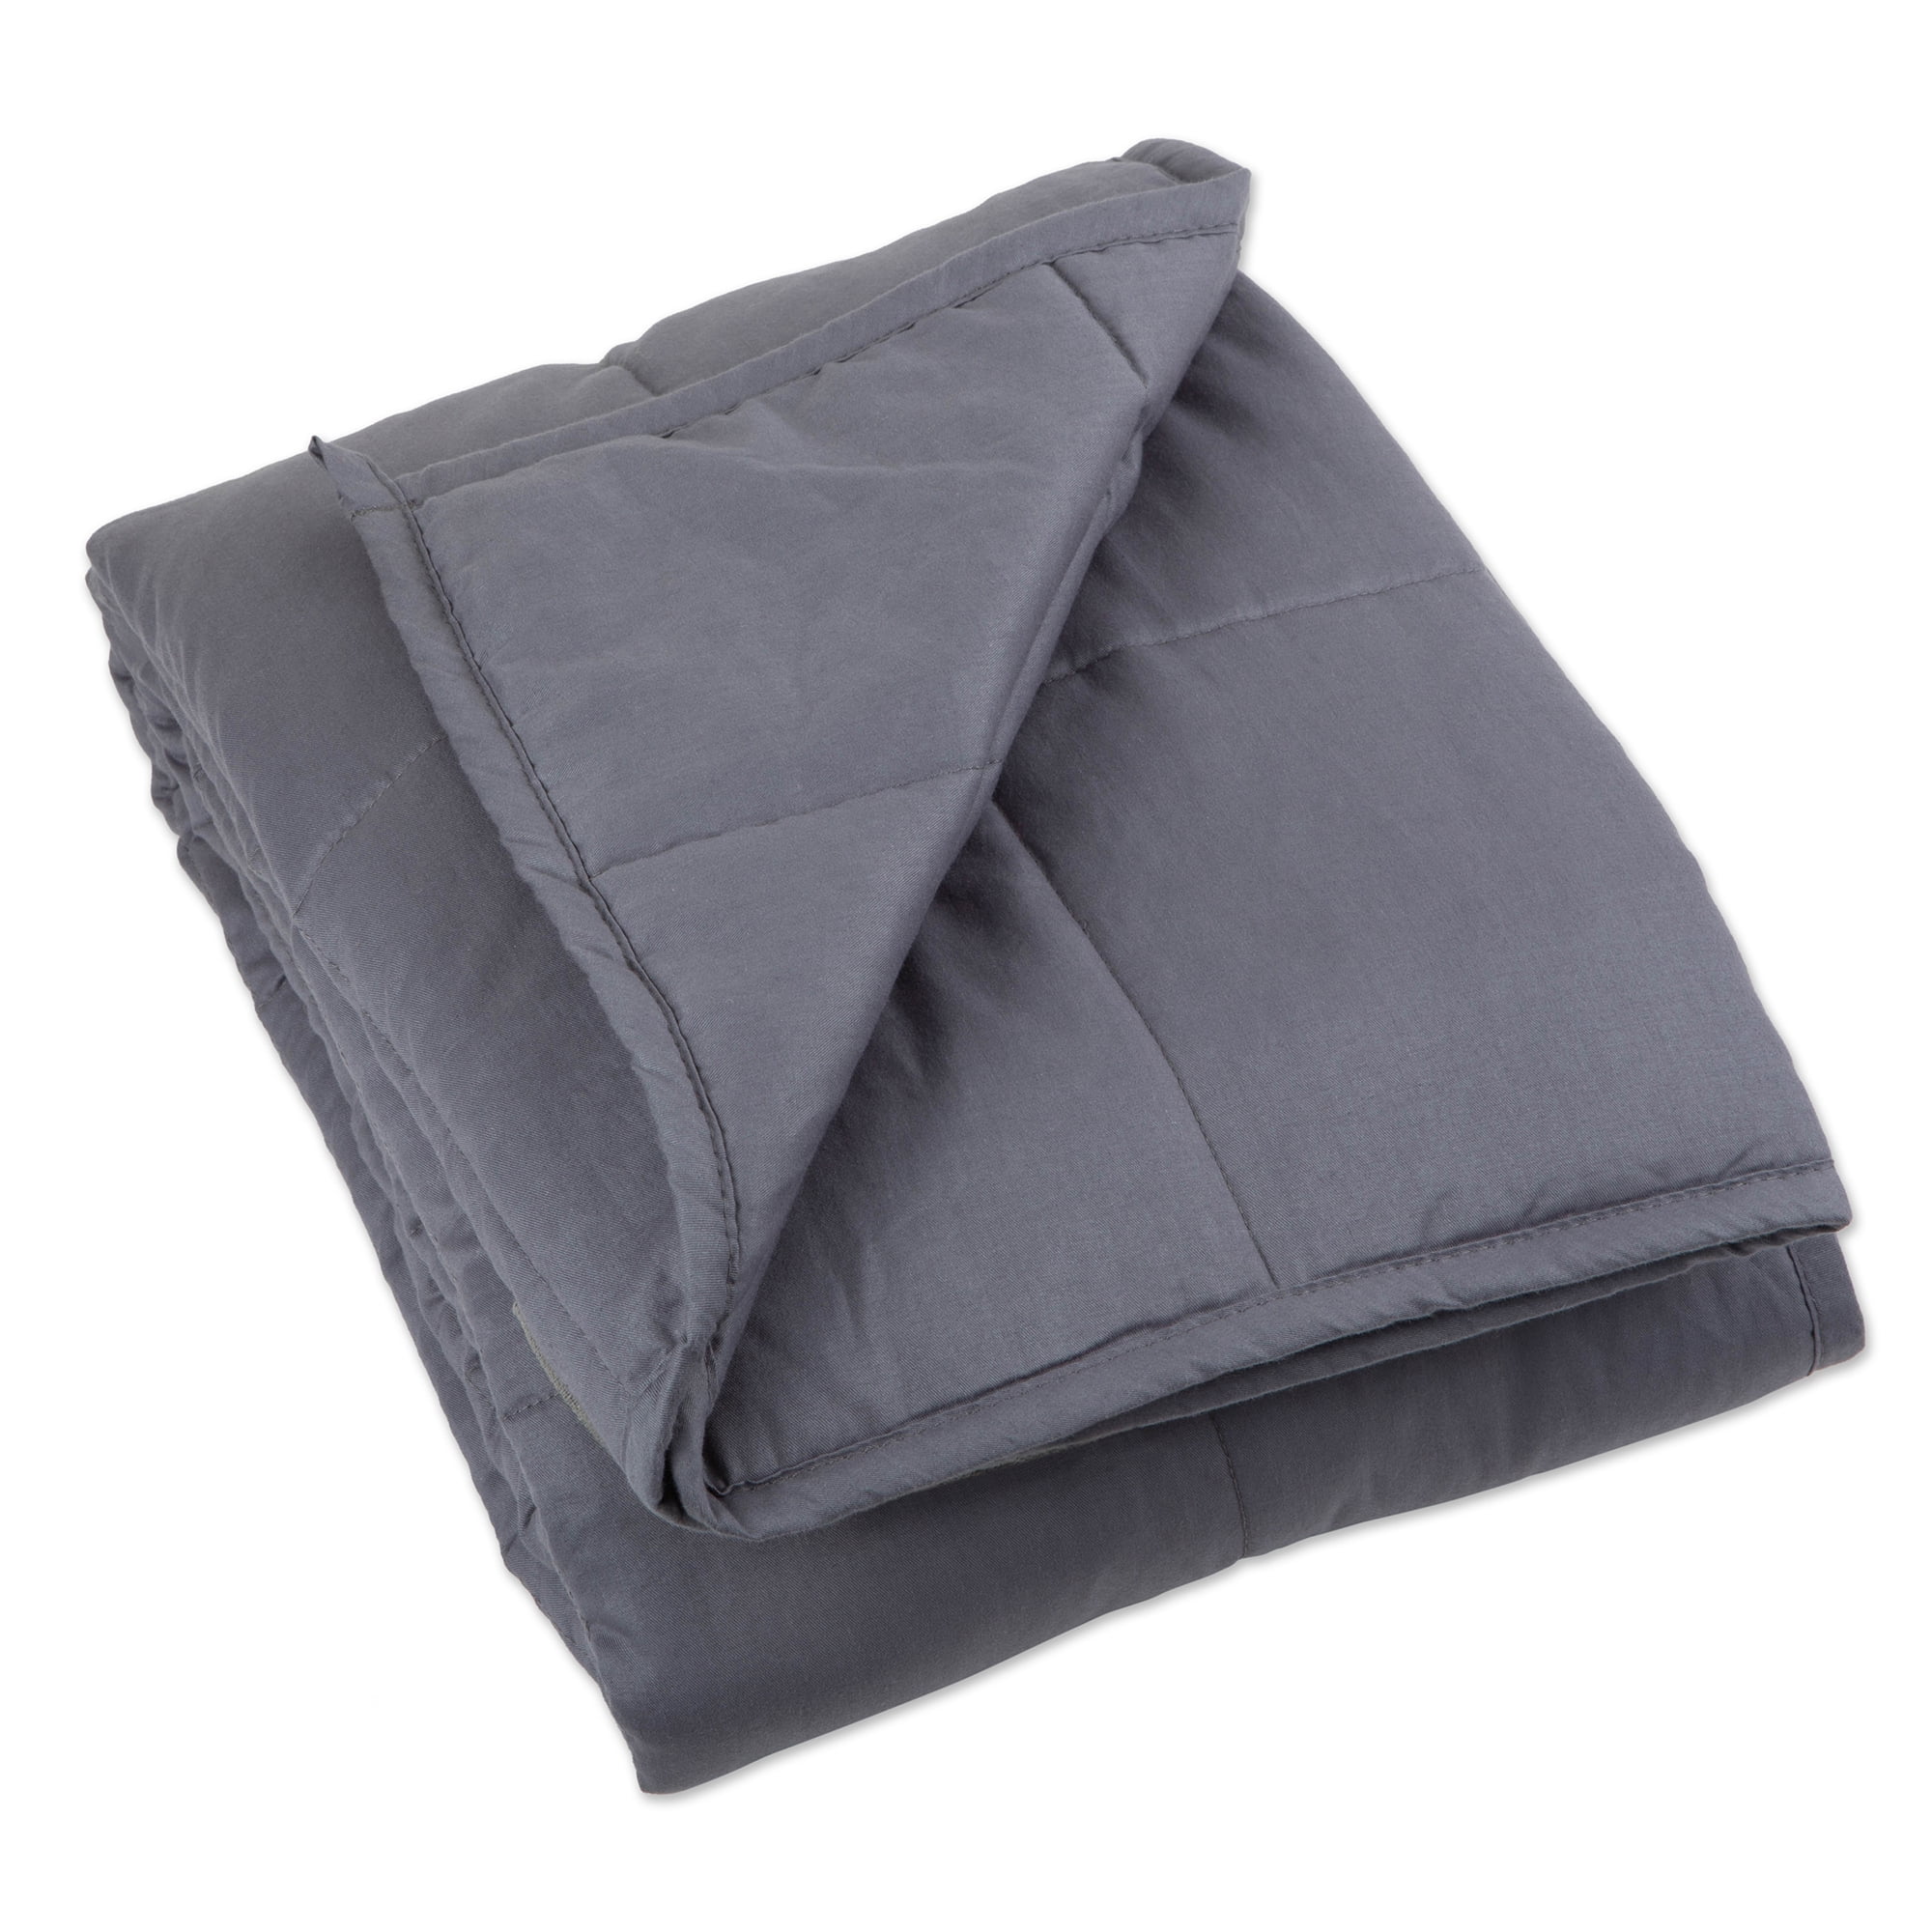 Z02285 15 lbs Weighted Blanket, Grey - 48 x 72 in -  Bucky